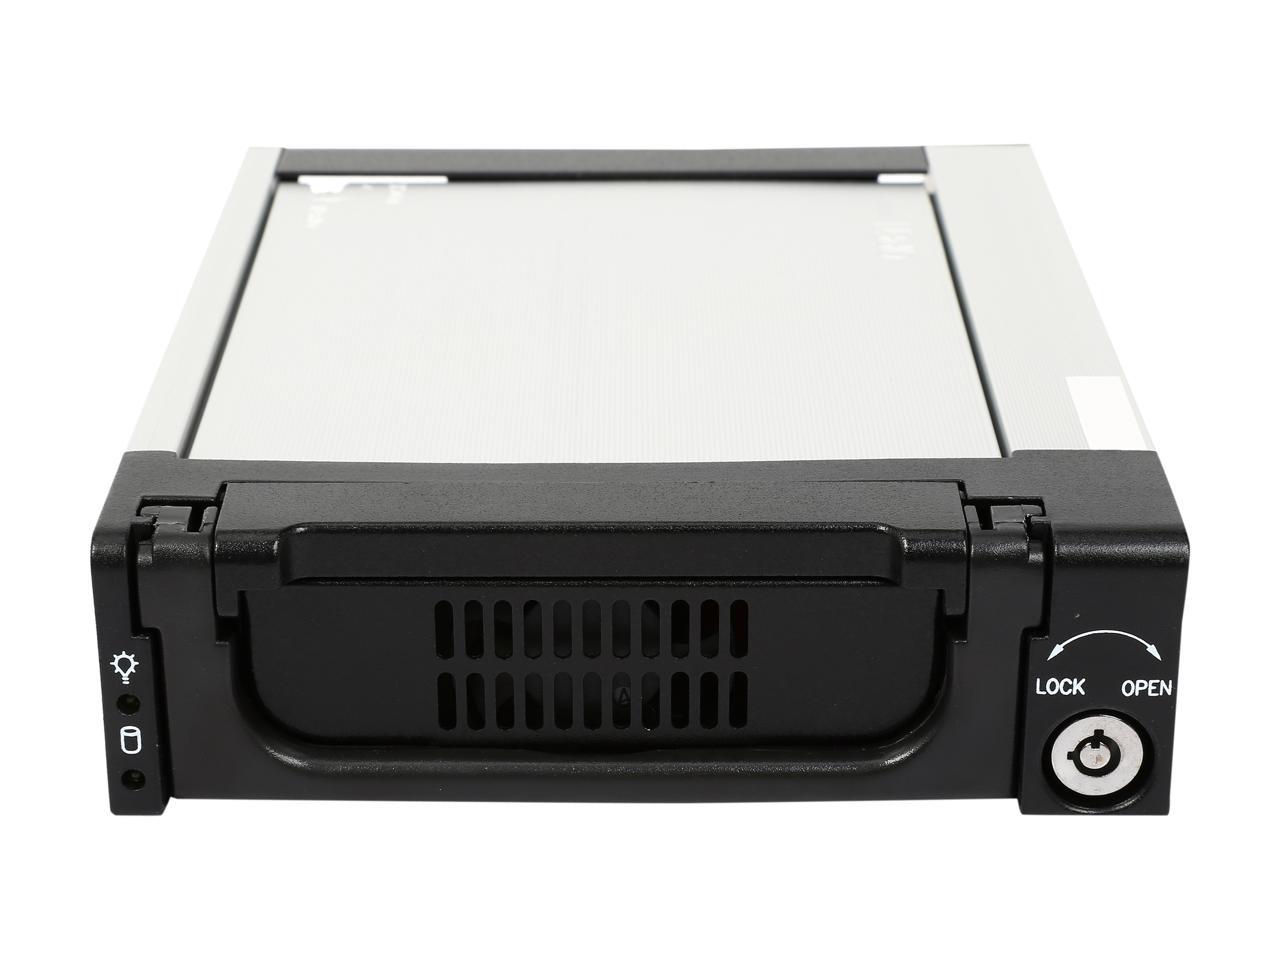 Athena Power MR-135AB 3.5" HDD Hot-Swap Mobile Rack Converts 1 x 5.25" to 1 x 3.5" SATA/SAS 6Gb/s HDD - Aluminum Cage & Tray w/ Dual Function Keylock, LED Indicator & 1 x 40mm Fan - OEM